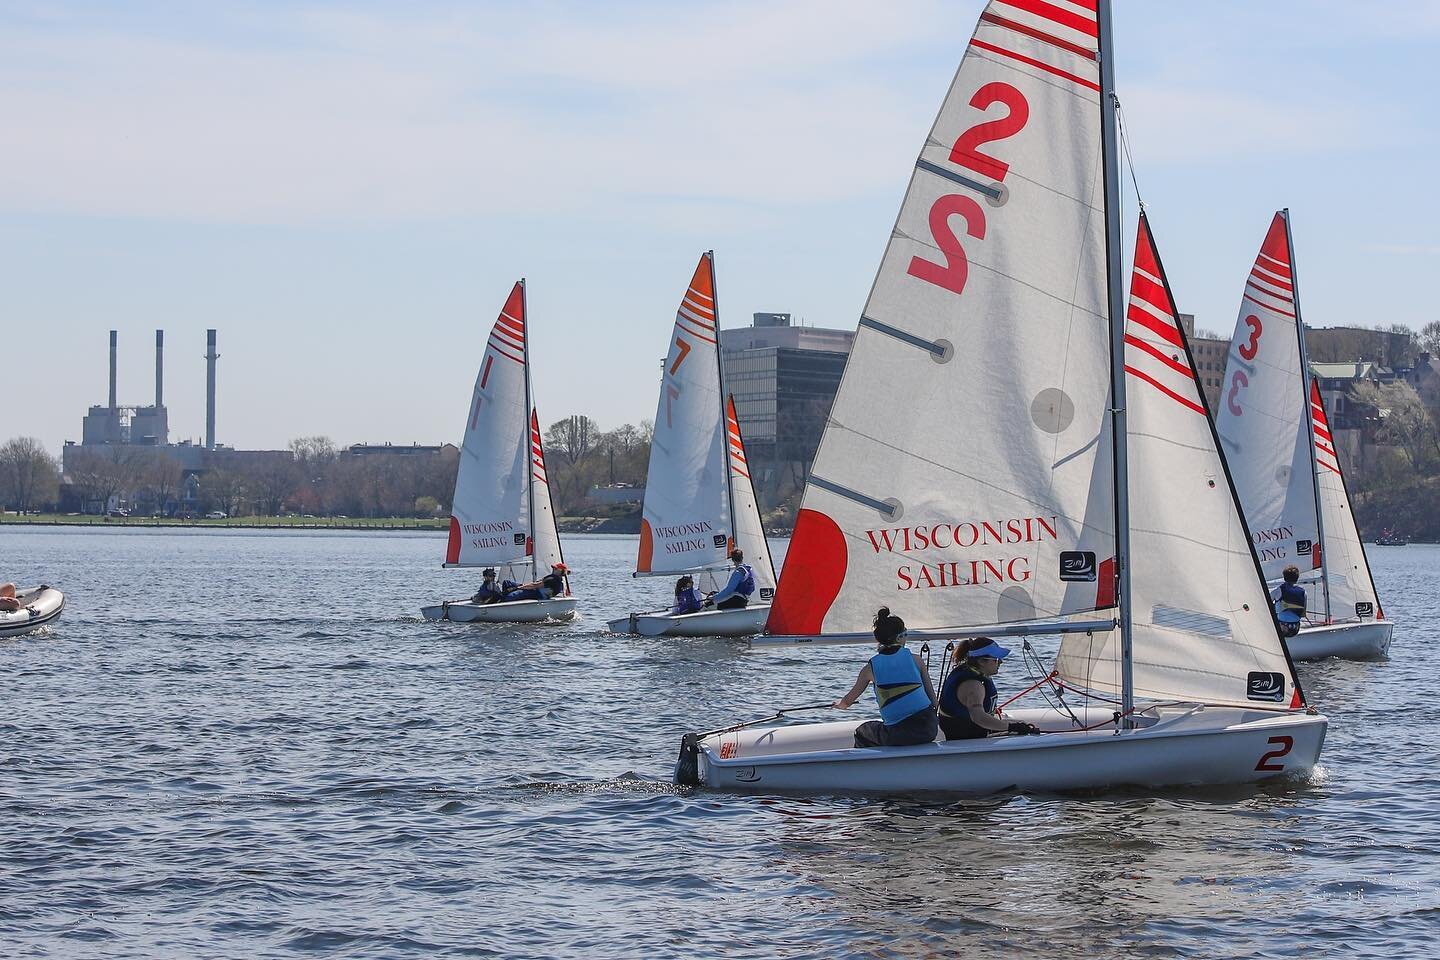 Last weekend, we sent ten of our sailors to compete in two regattas hosted by @wiscosailing! Friday Marquette competed against five schools in a team race regatta and Saturday &amp; Sunday competed in the fleet race! Scores to the regattas are in our